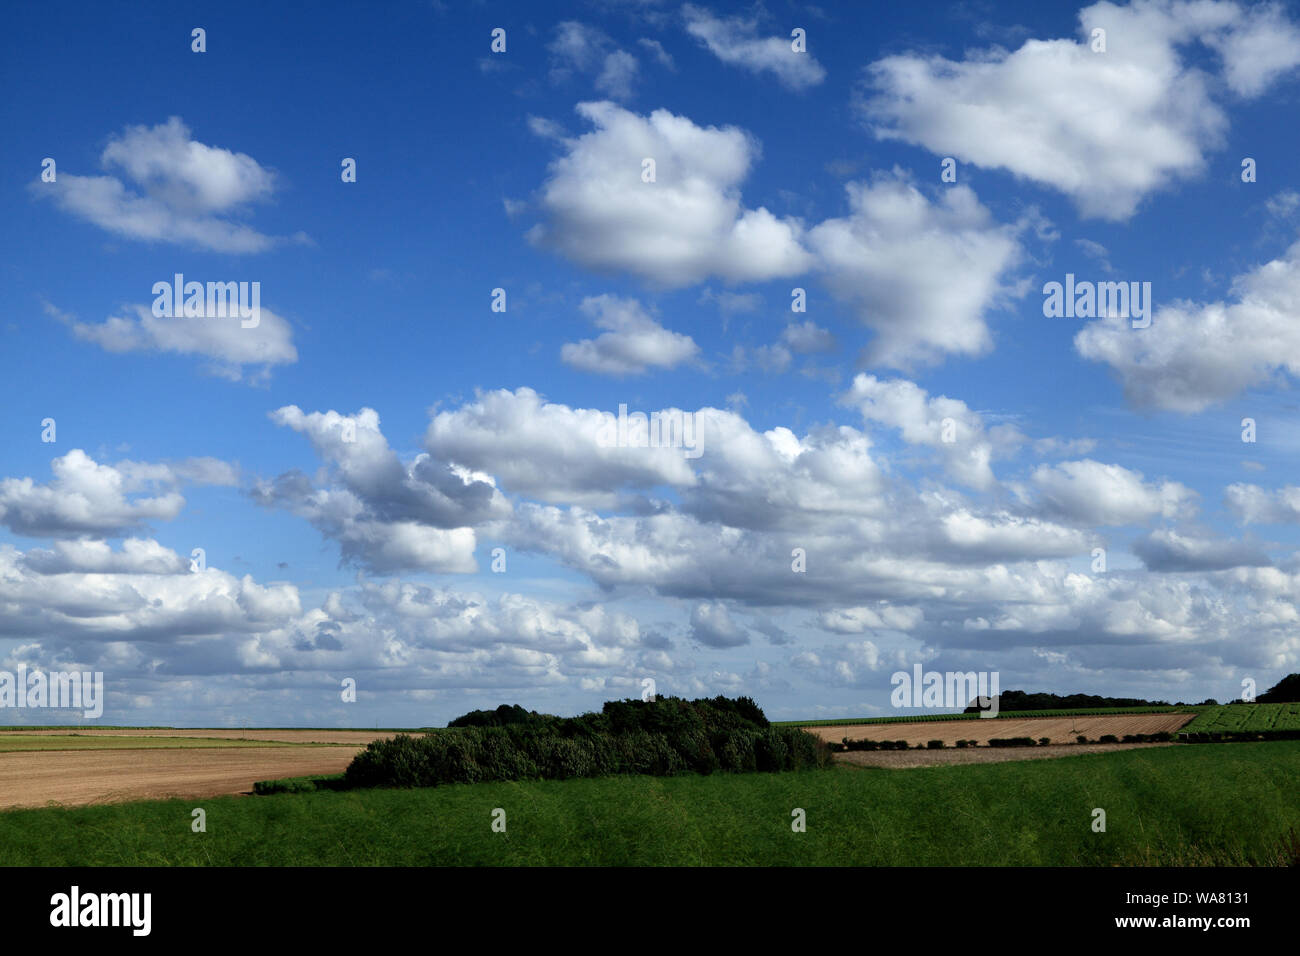 White, cumulus, clouds, blue sky, English, rural, agricultural, landscape Stock Photo